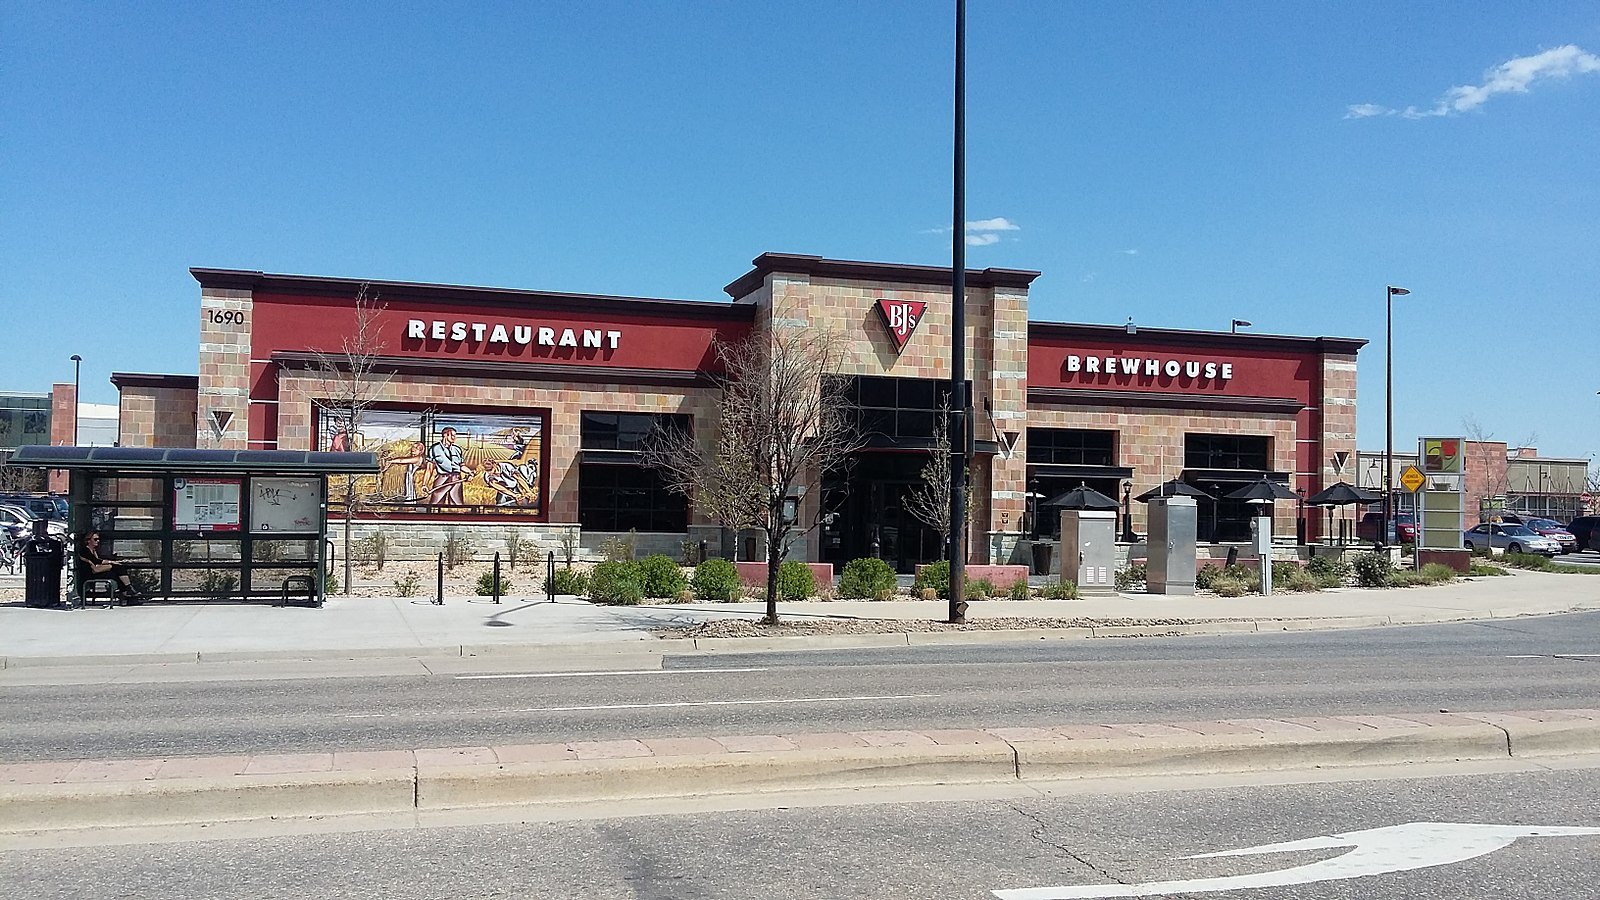 BJ's Restaurant and Brewhouse